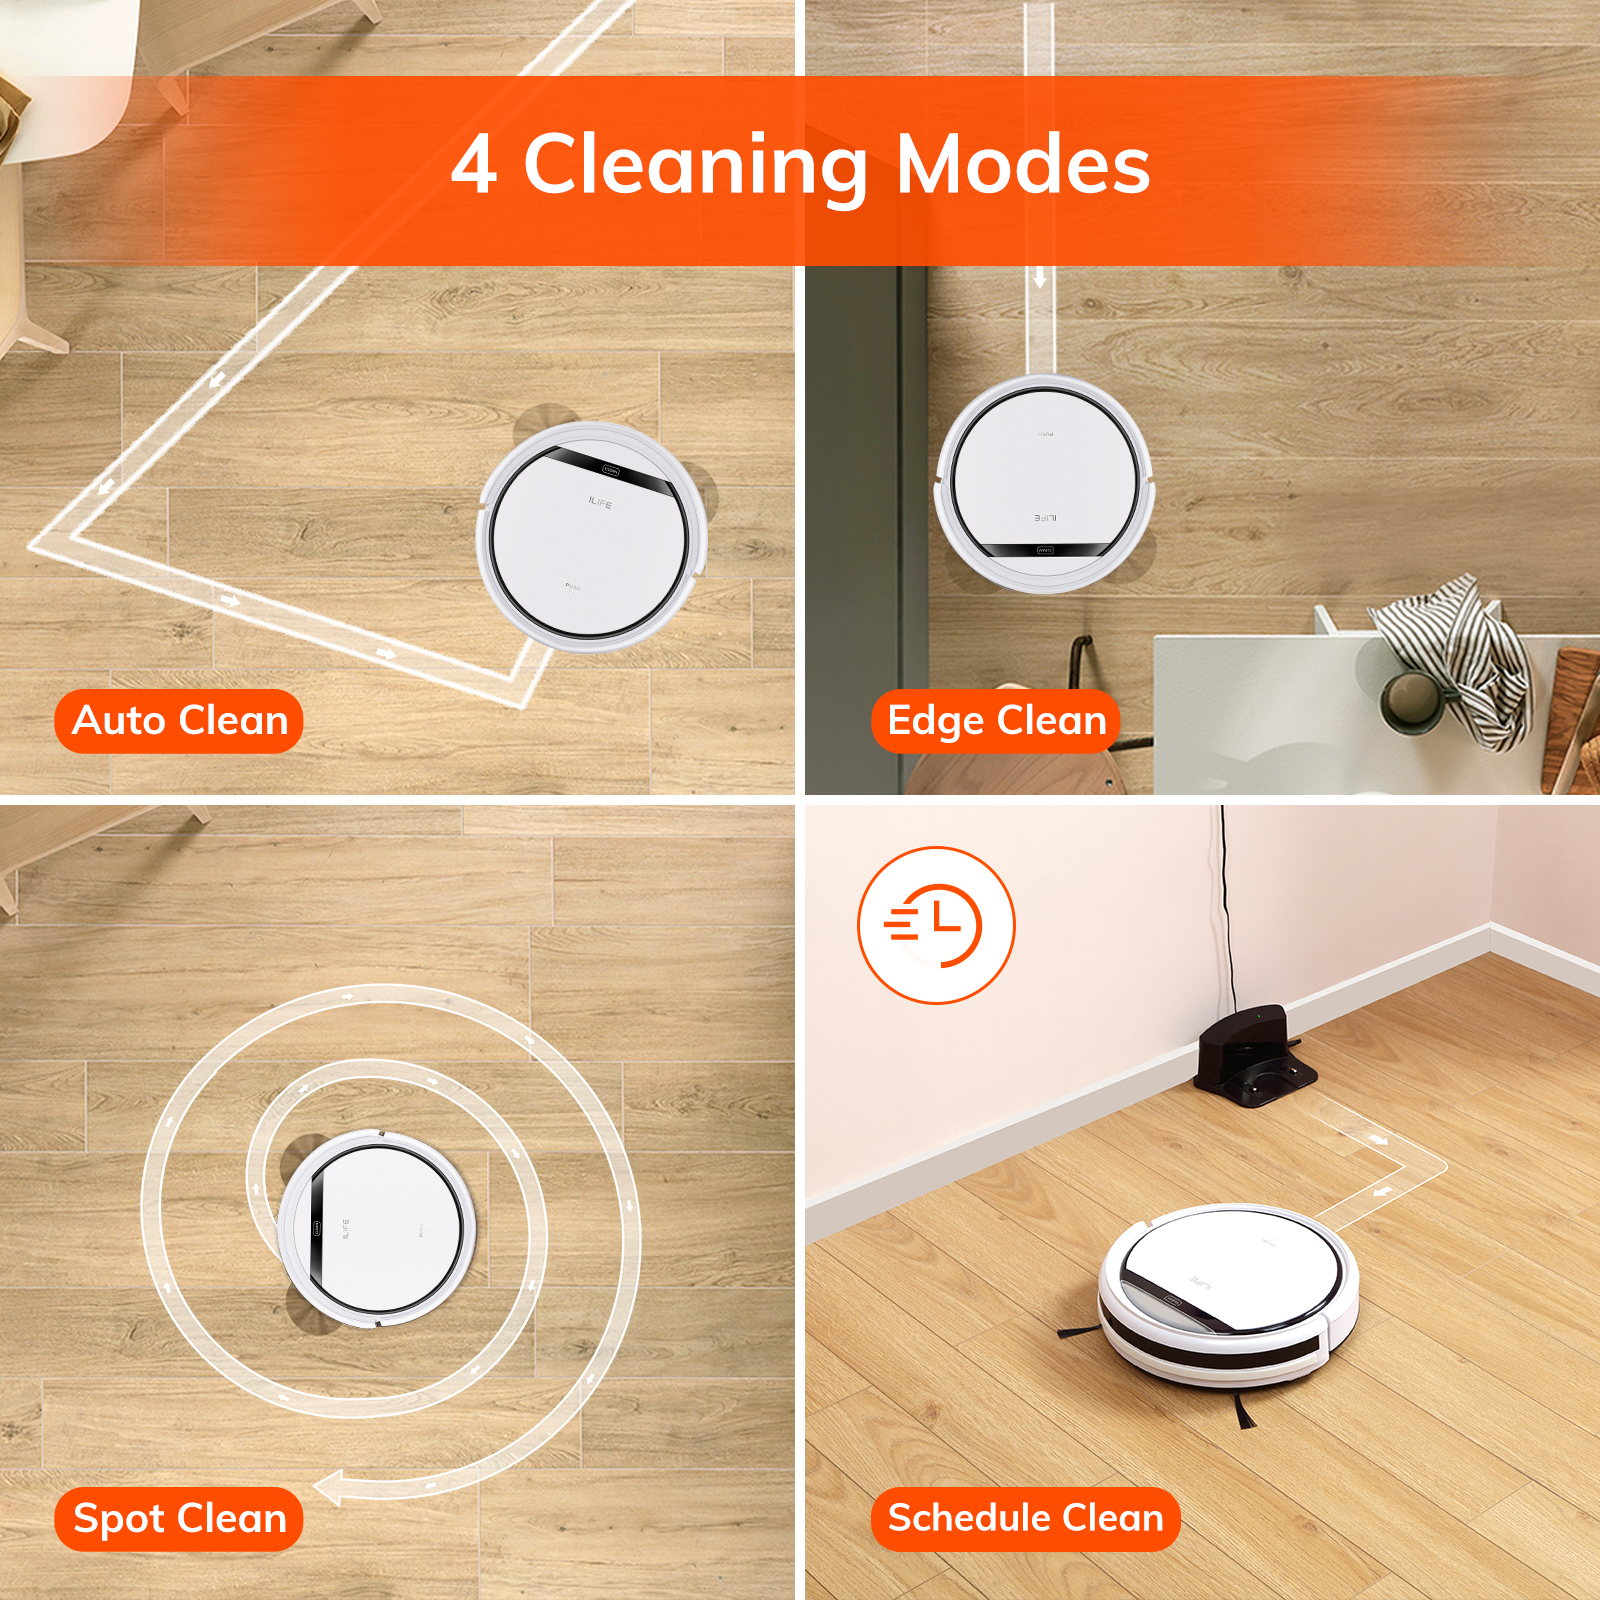 ILIFE V3sPro Robotic Vacuum Cleaner With Power Suction Great for Pet Shedding - image 2 of 6